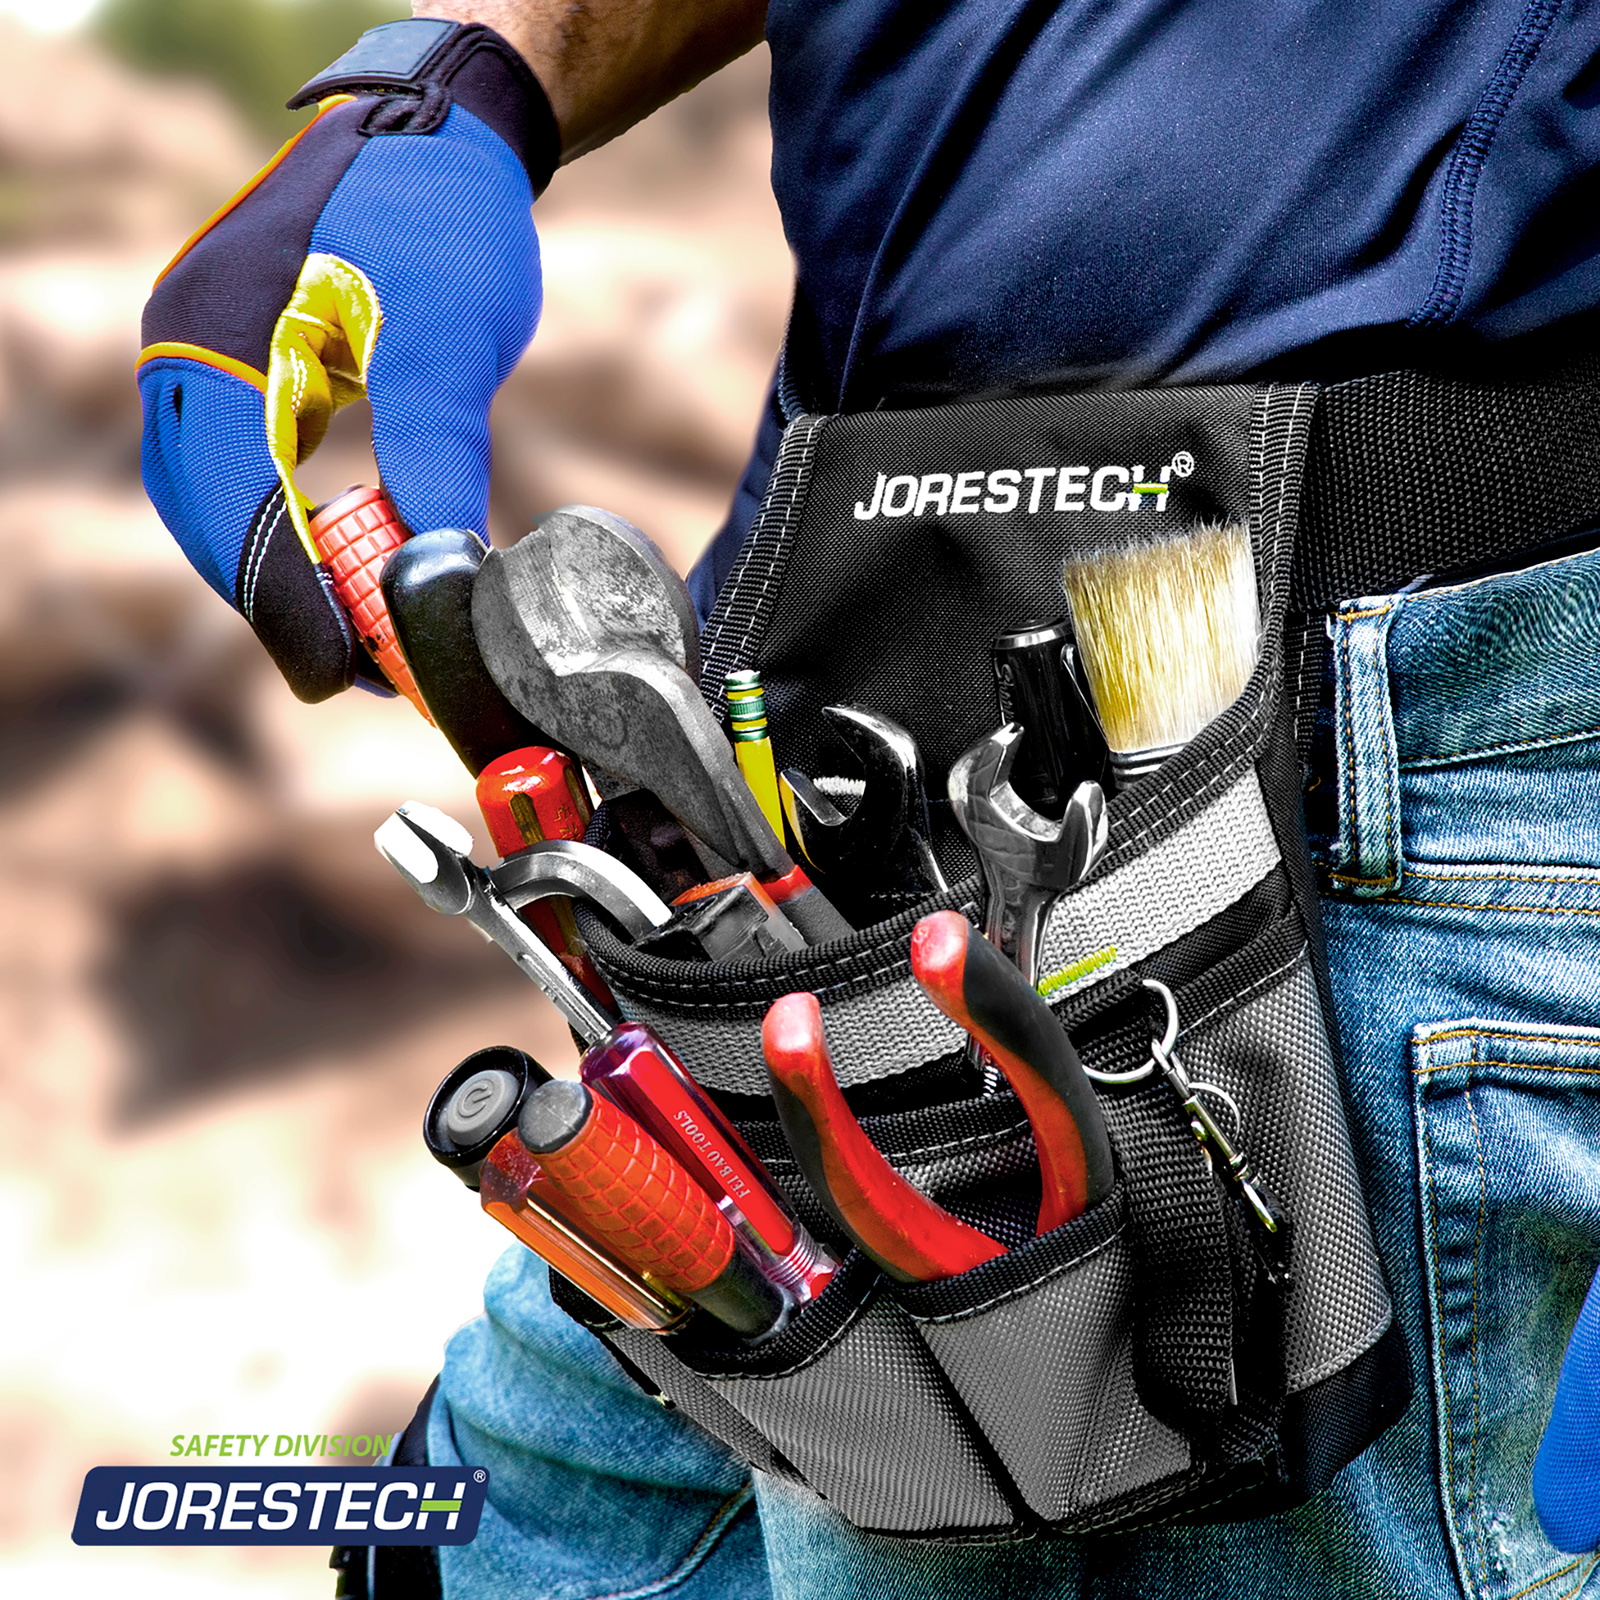 A worker wearing safety gloves accesing a screw driver form his  6 pocket tool belt pouch which is filled with tools while he is a a job site.